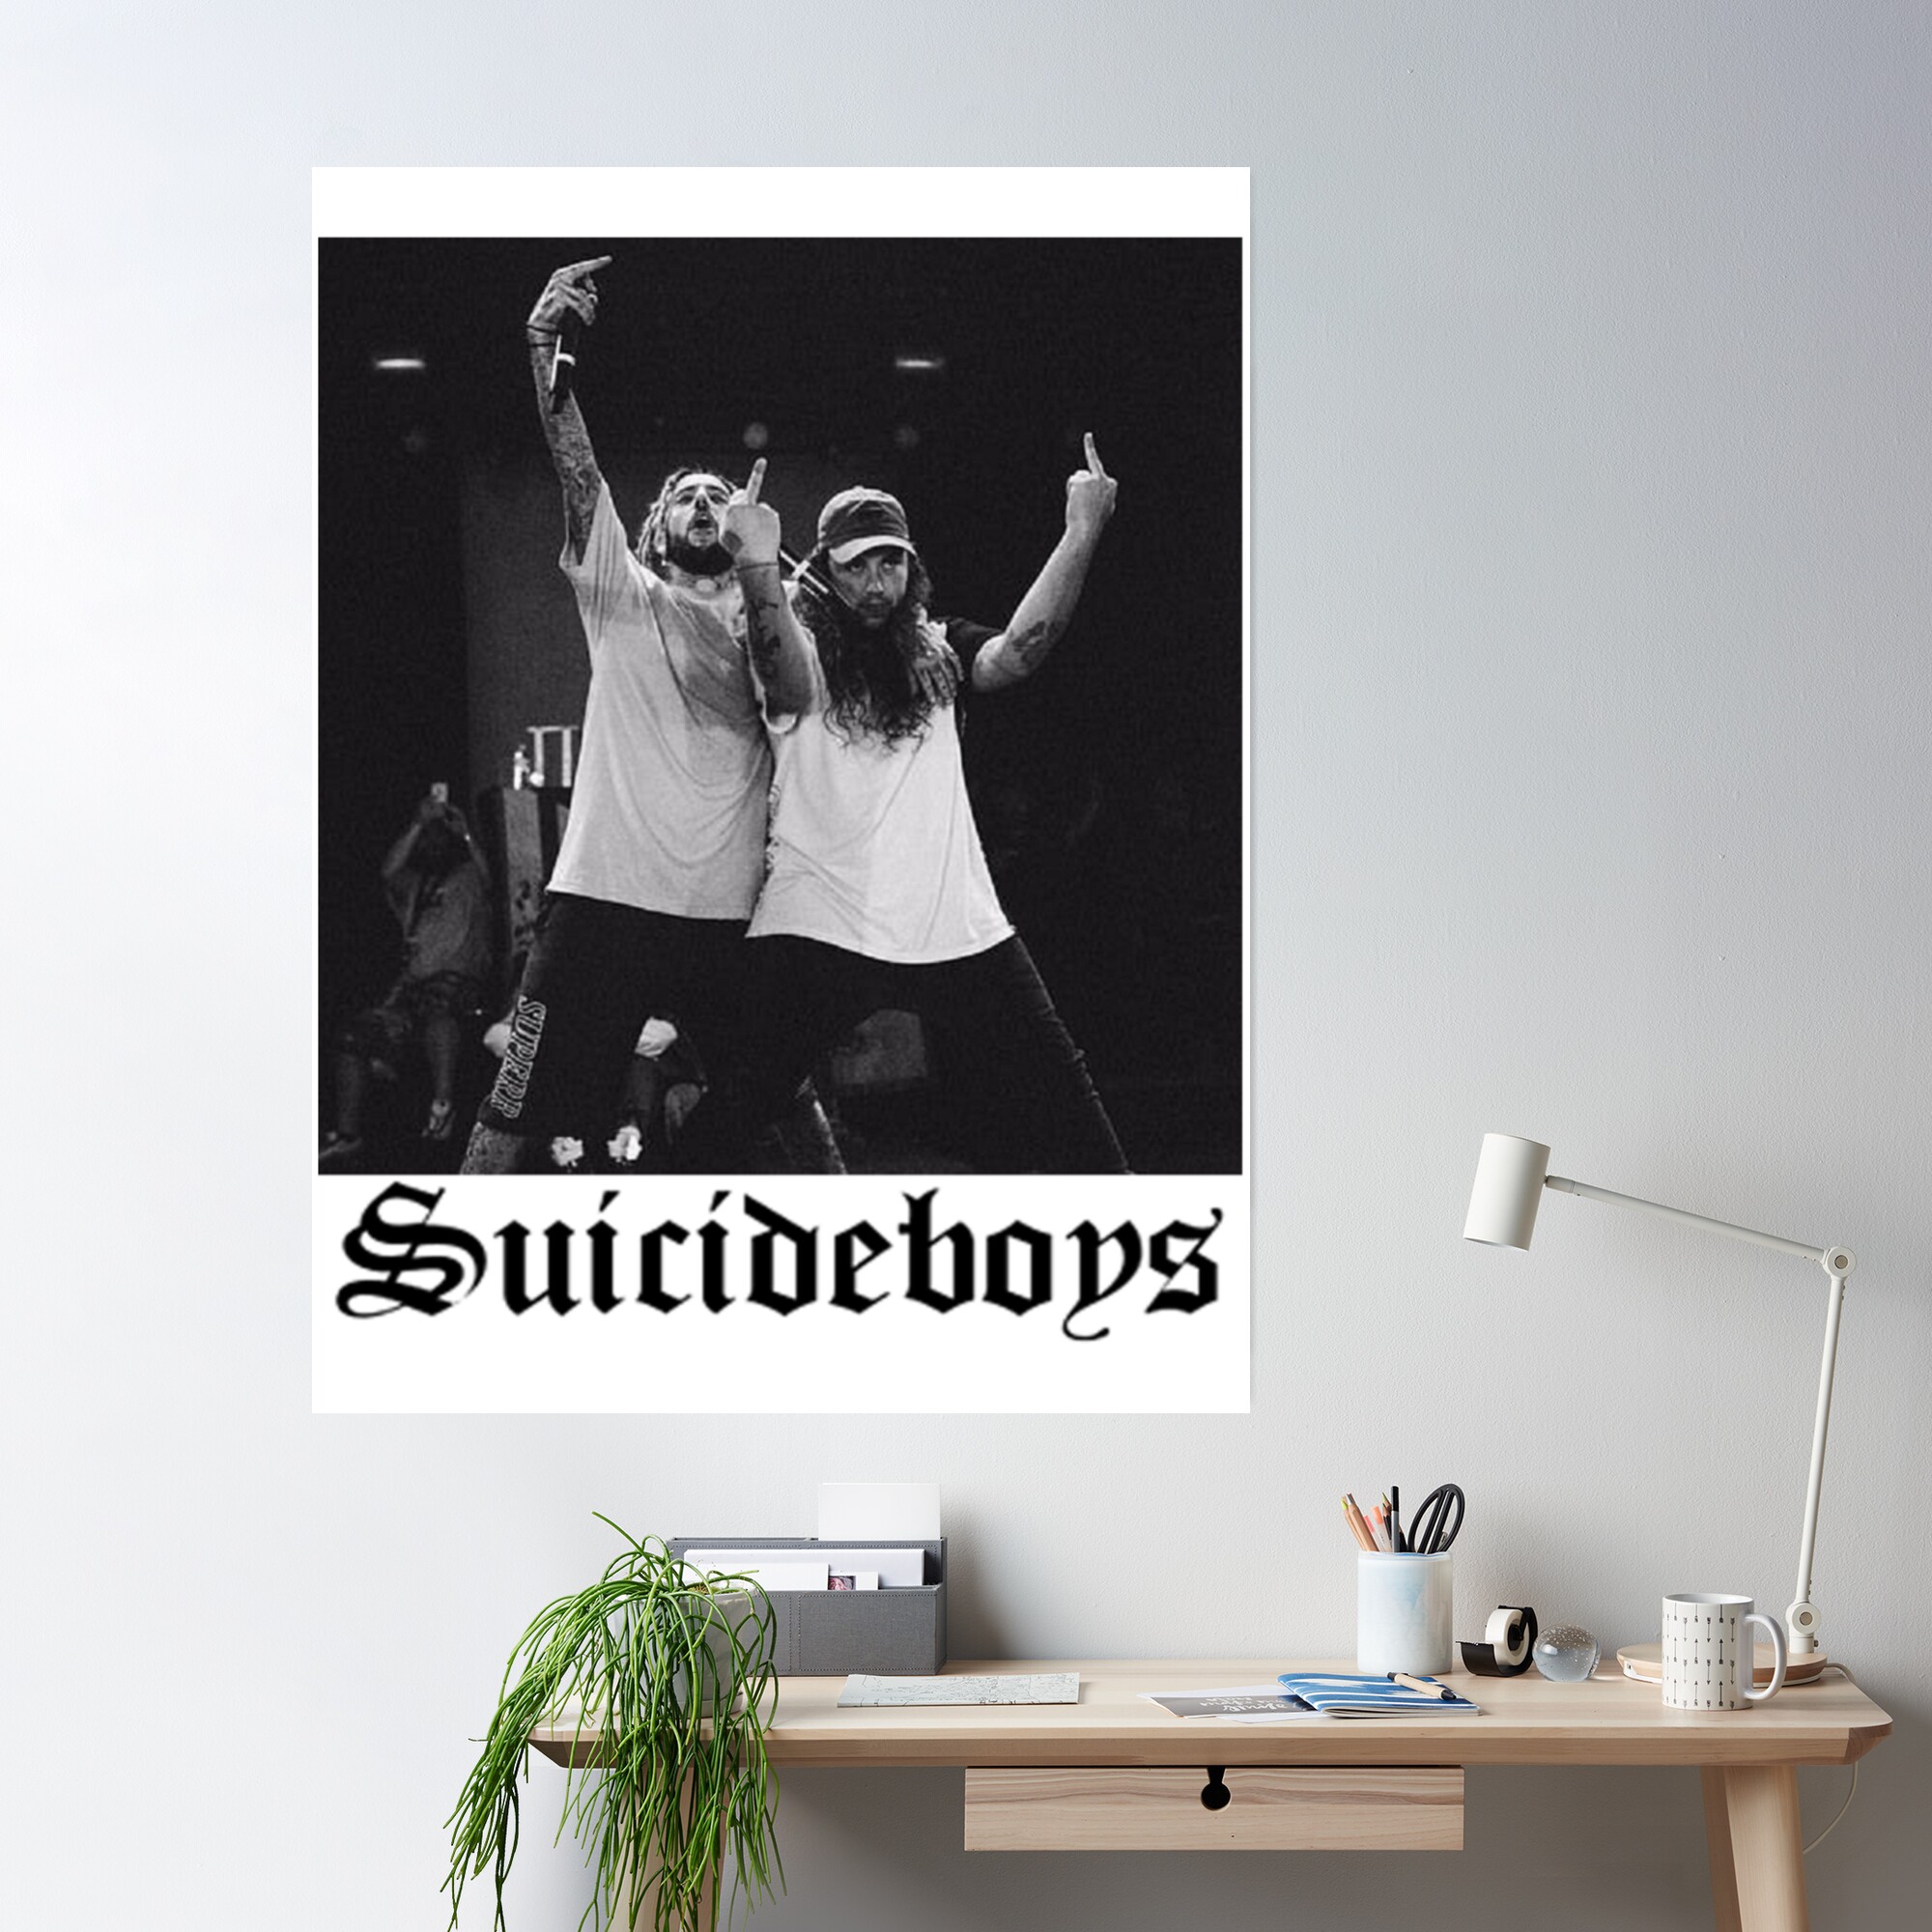 cposterlargesquare product2000x2000 9 - Suicideboys Shop